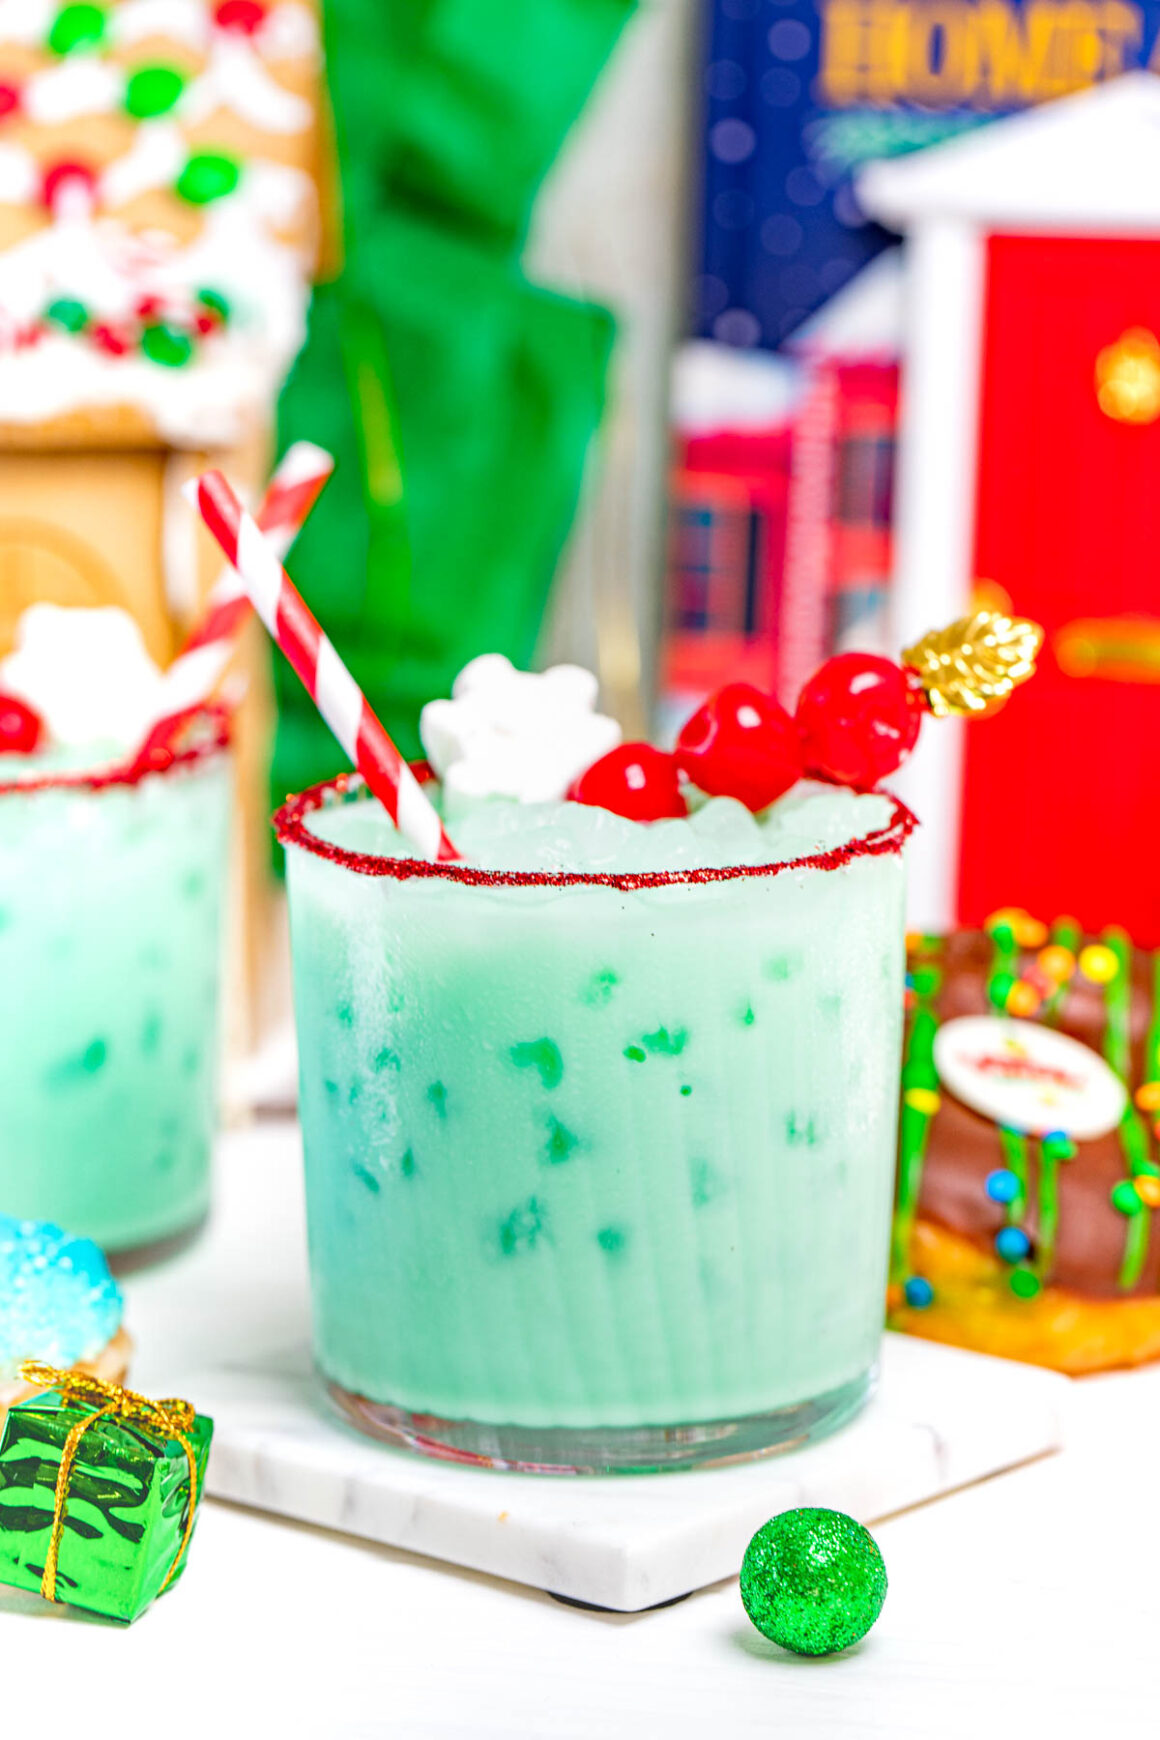 2 grinch cocktail recipes with a chocolate donut on the side for decoration